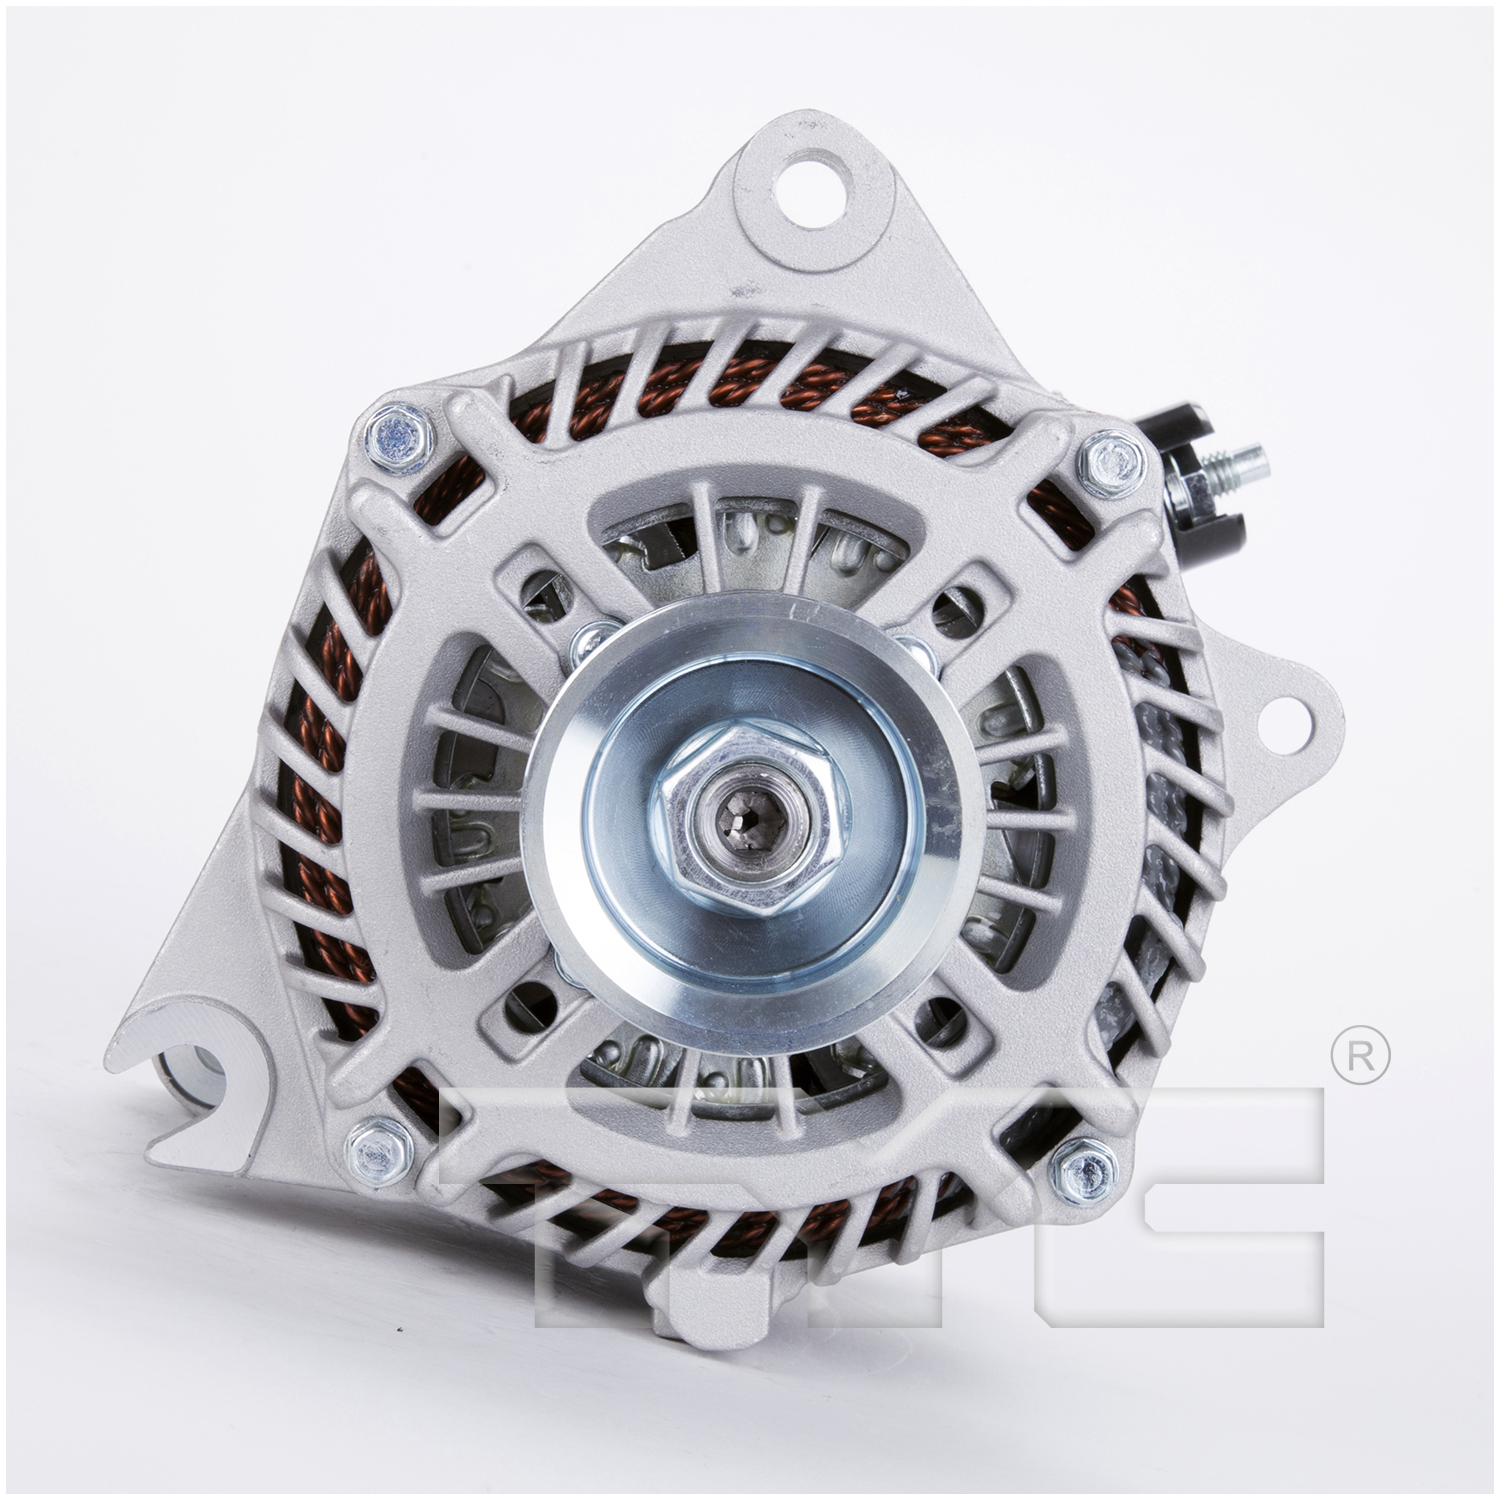 TYC-2-11658_NEW TYC ALTERNATOR 12V 175AMP FOR FORD & LINCOLN APPLICATIONS